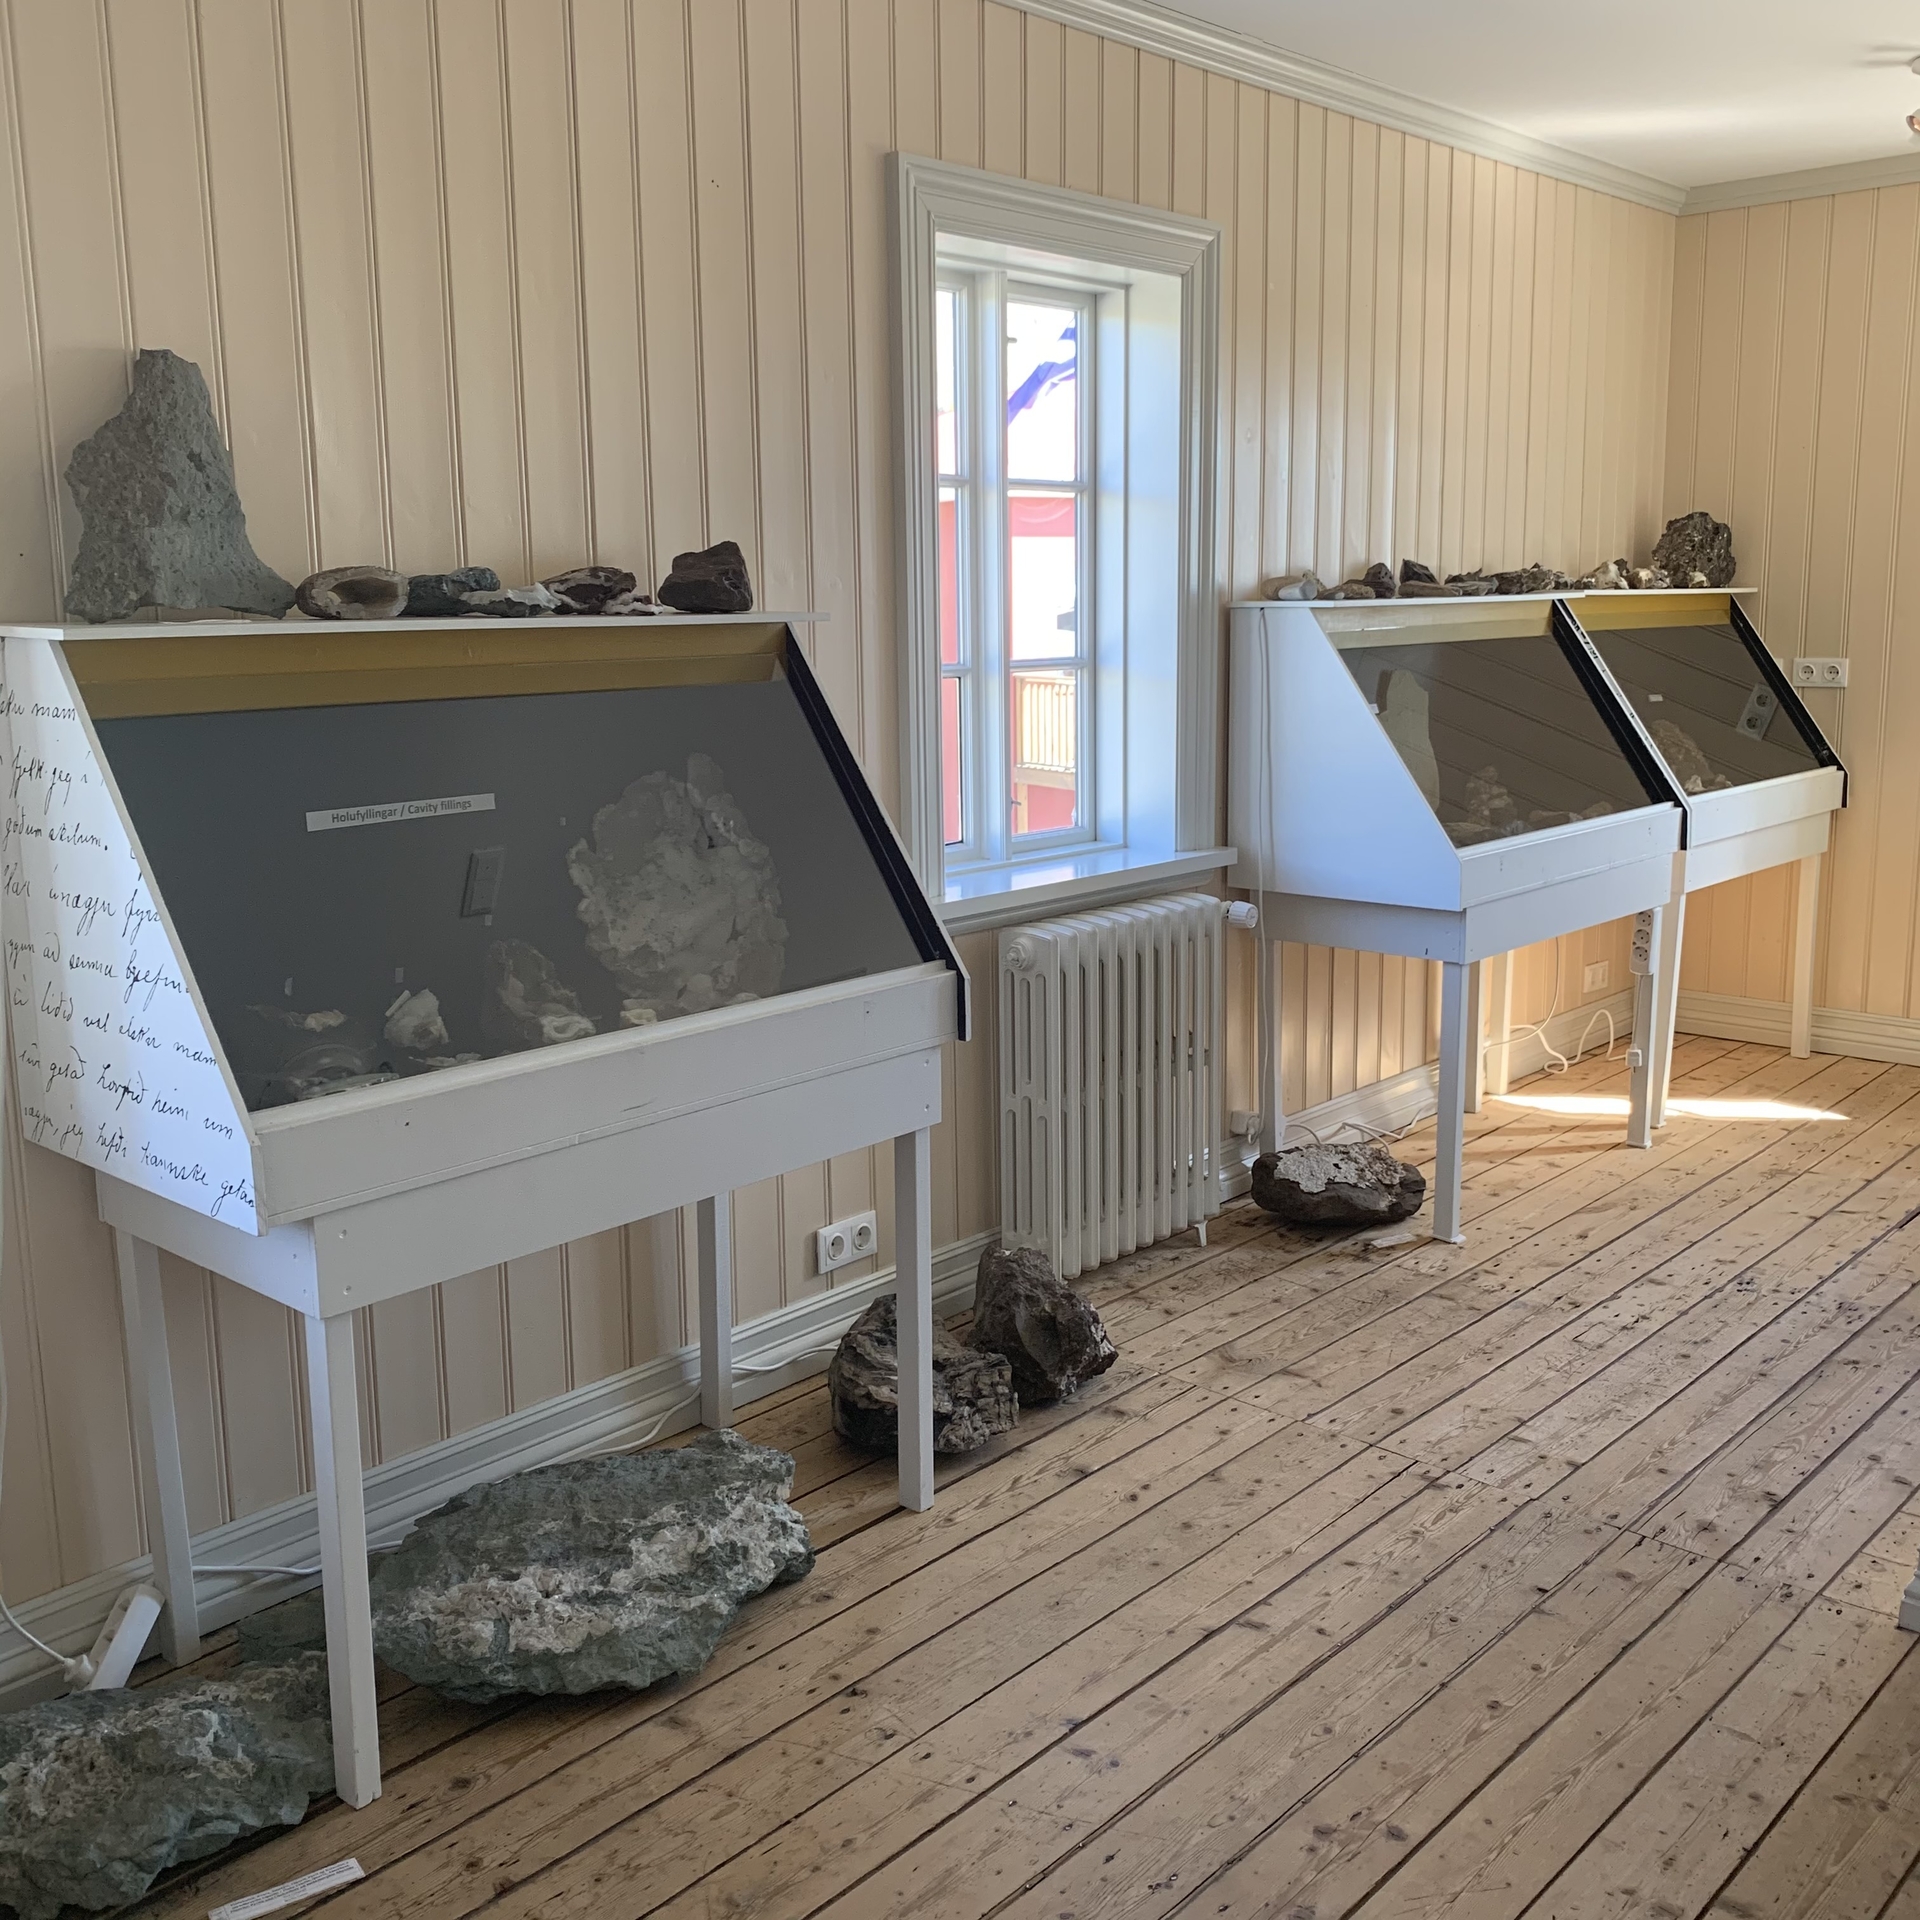 The diversity of minerals and rocks in East Iceland is featured in these display cases